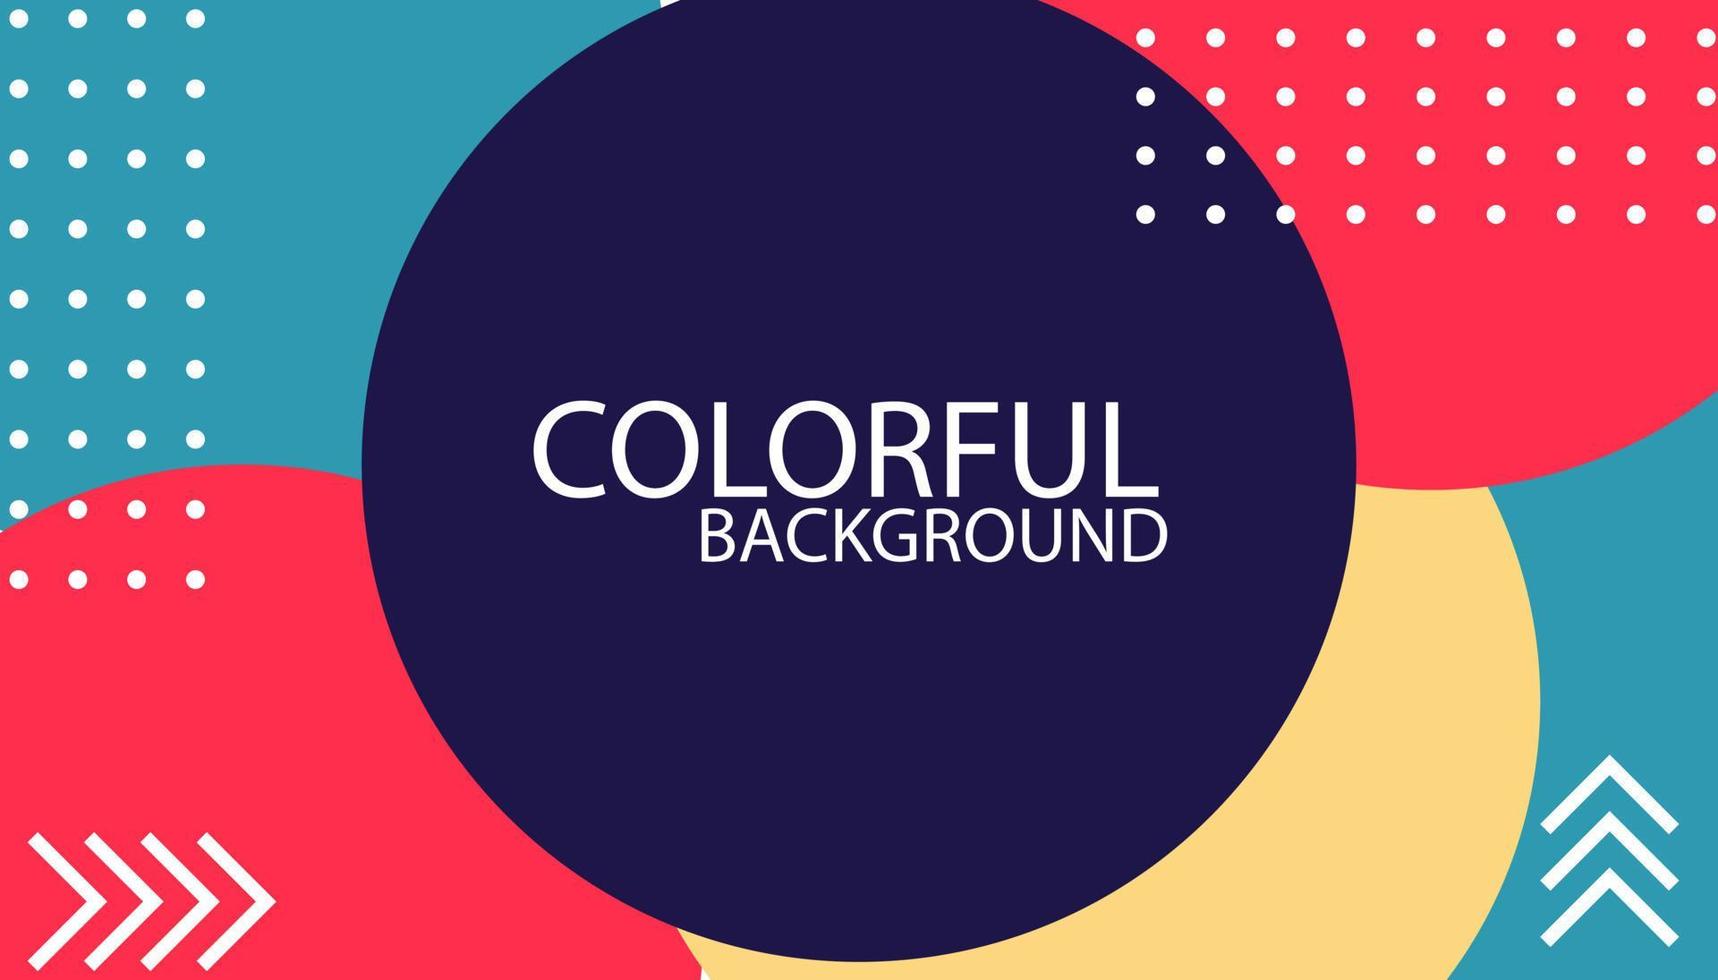 colorful abstract background poster with simple shape and figure. Abstract vector pattern design for web banner, business presentation, branding package, fabric print, wallpaper